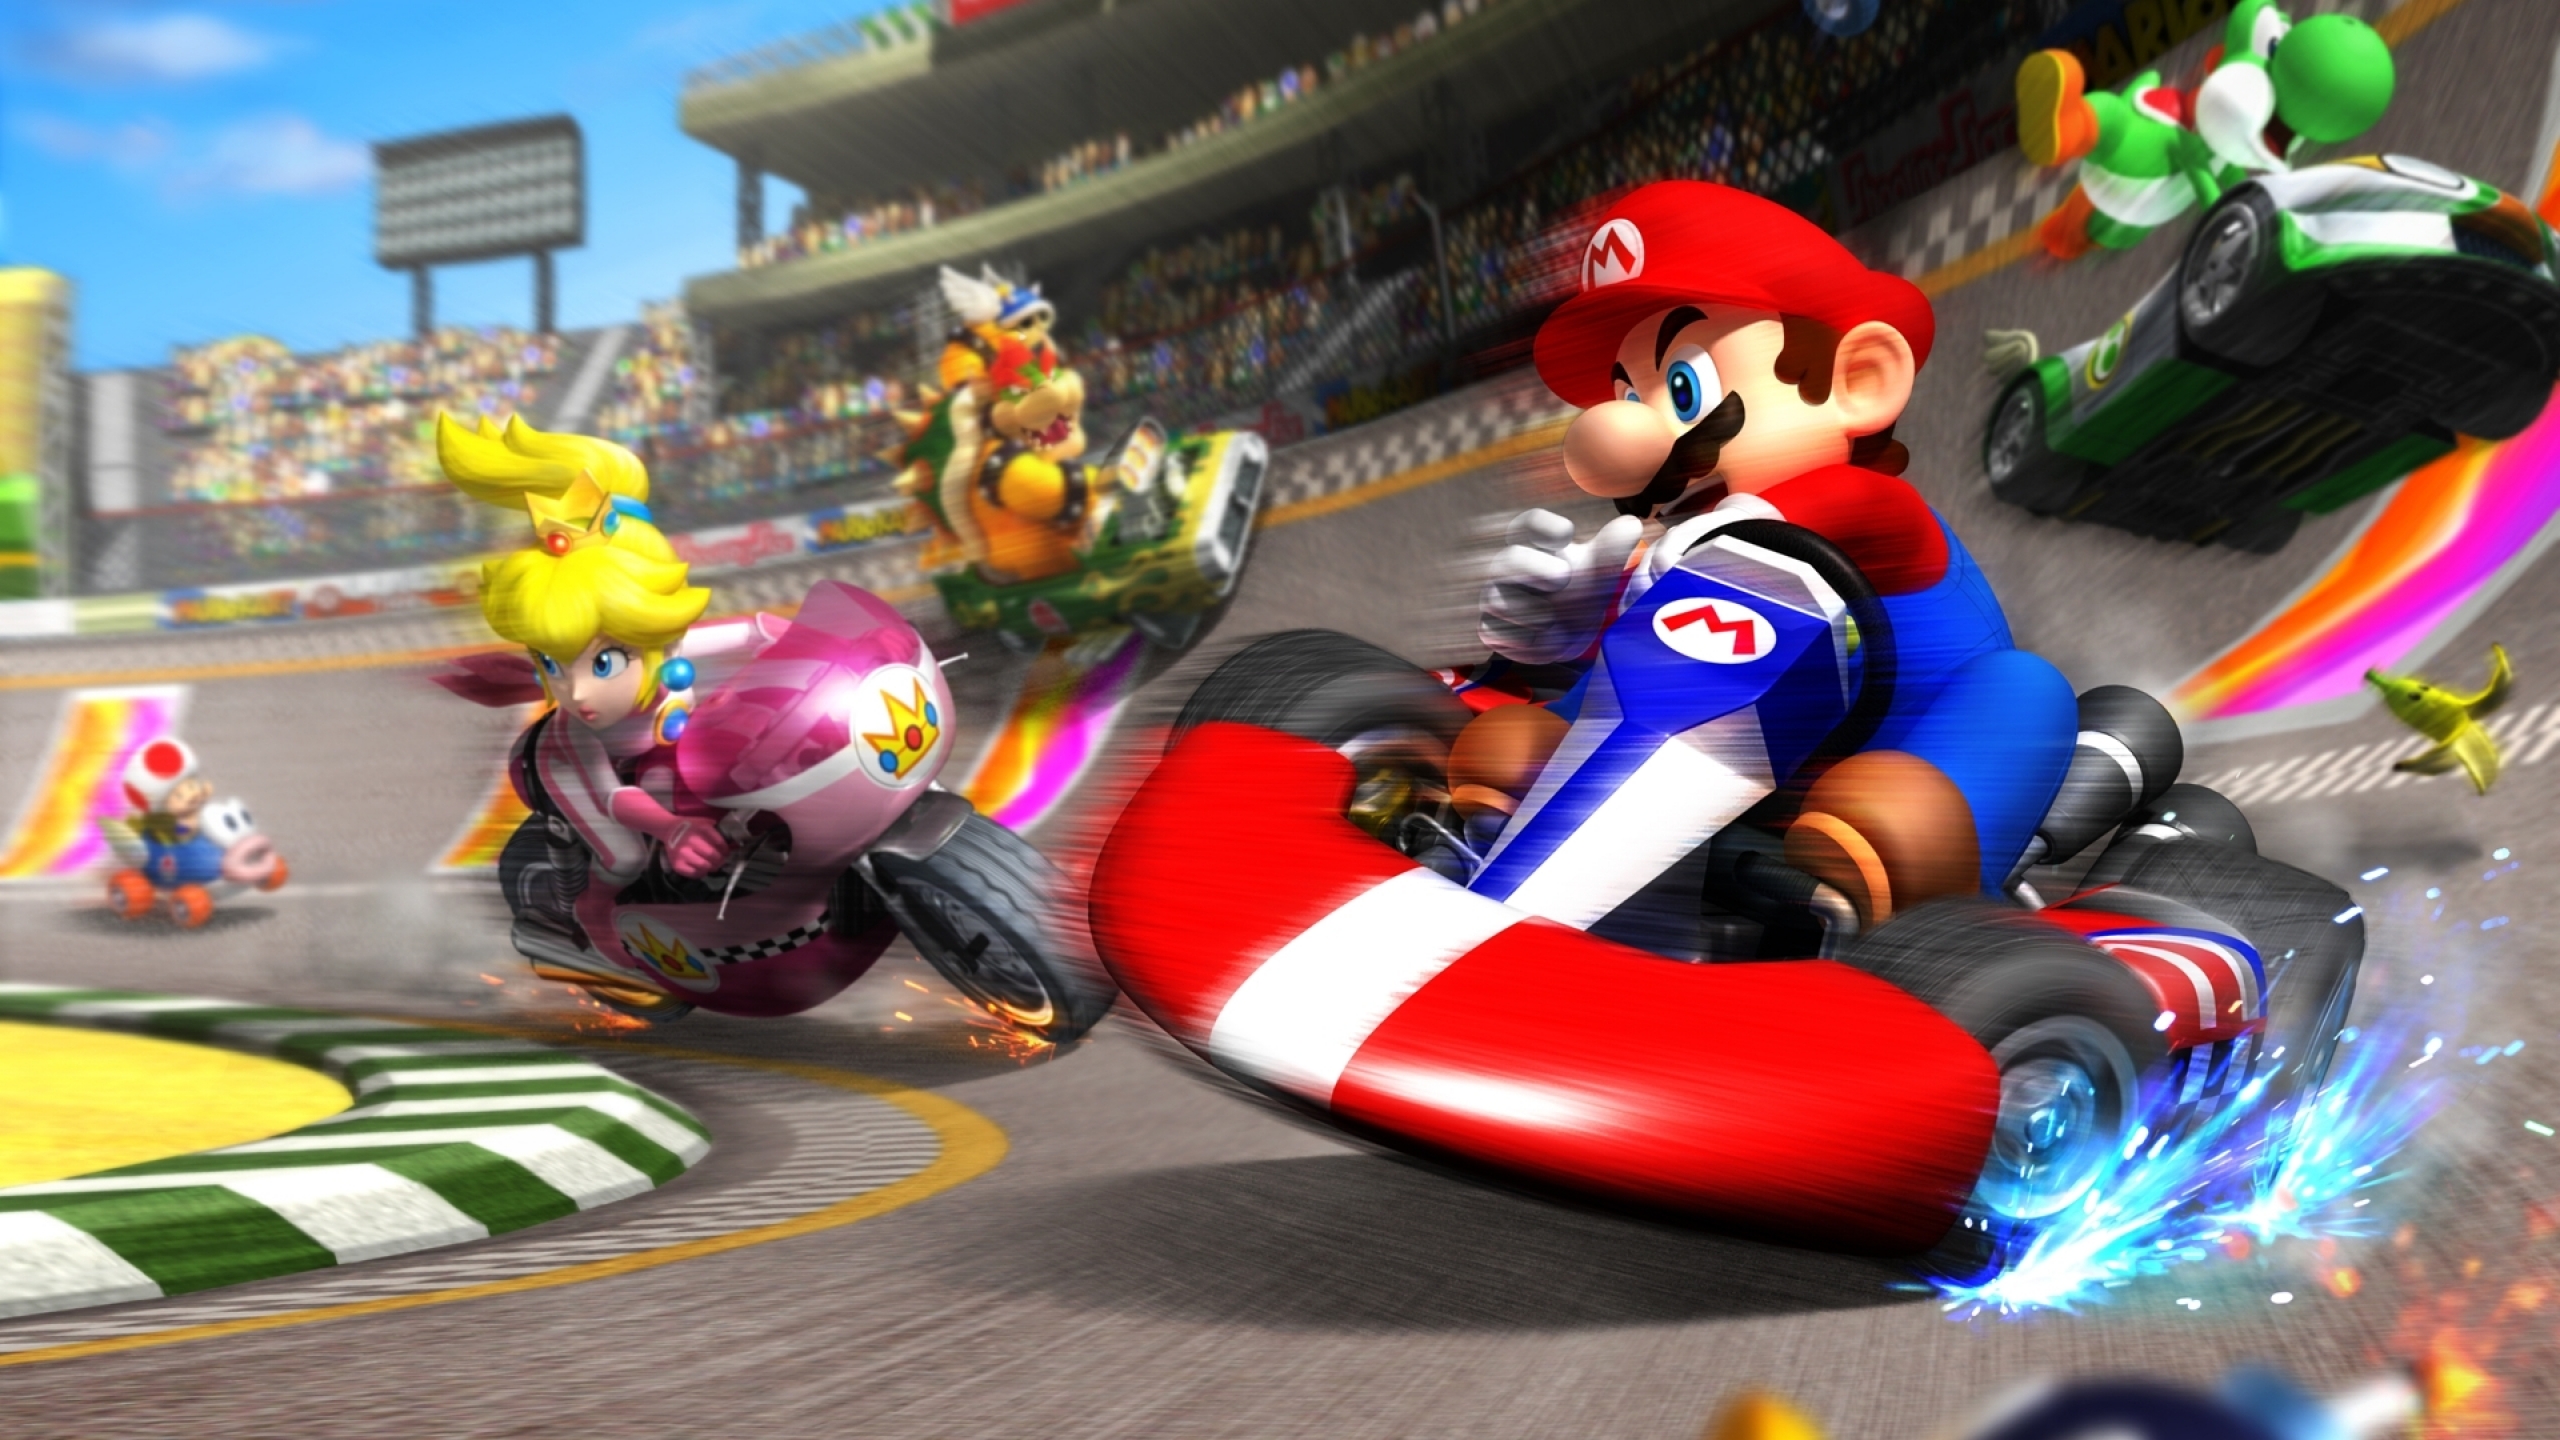 Awesome Mario Kart Wallpaper Px High